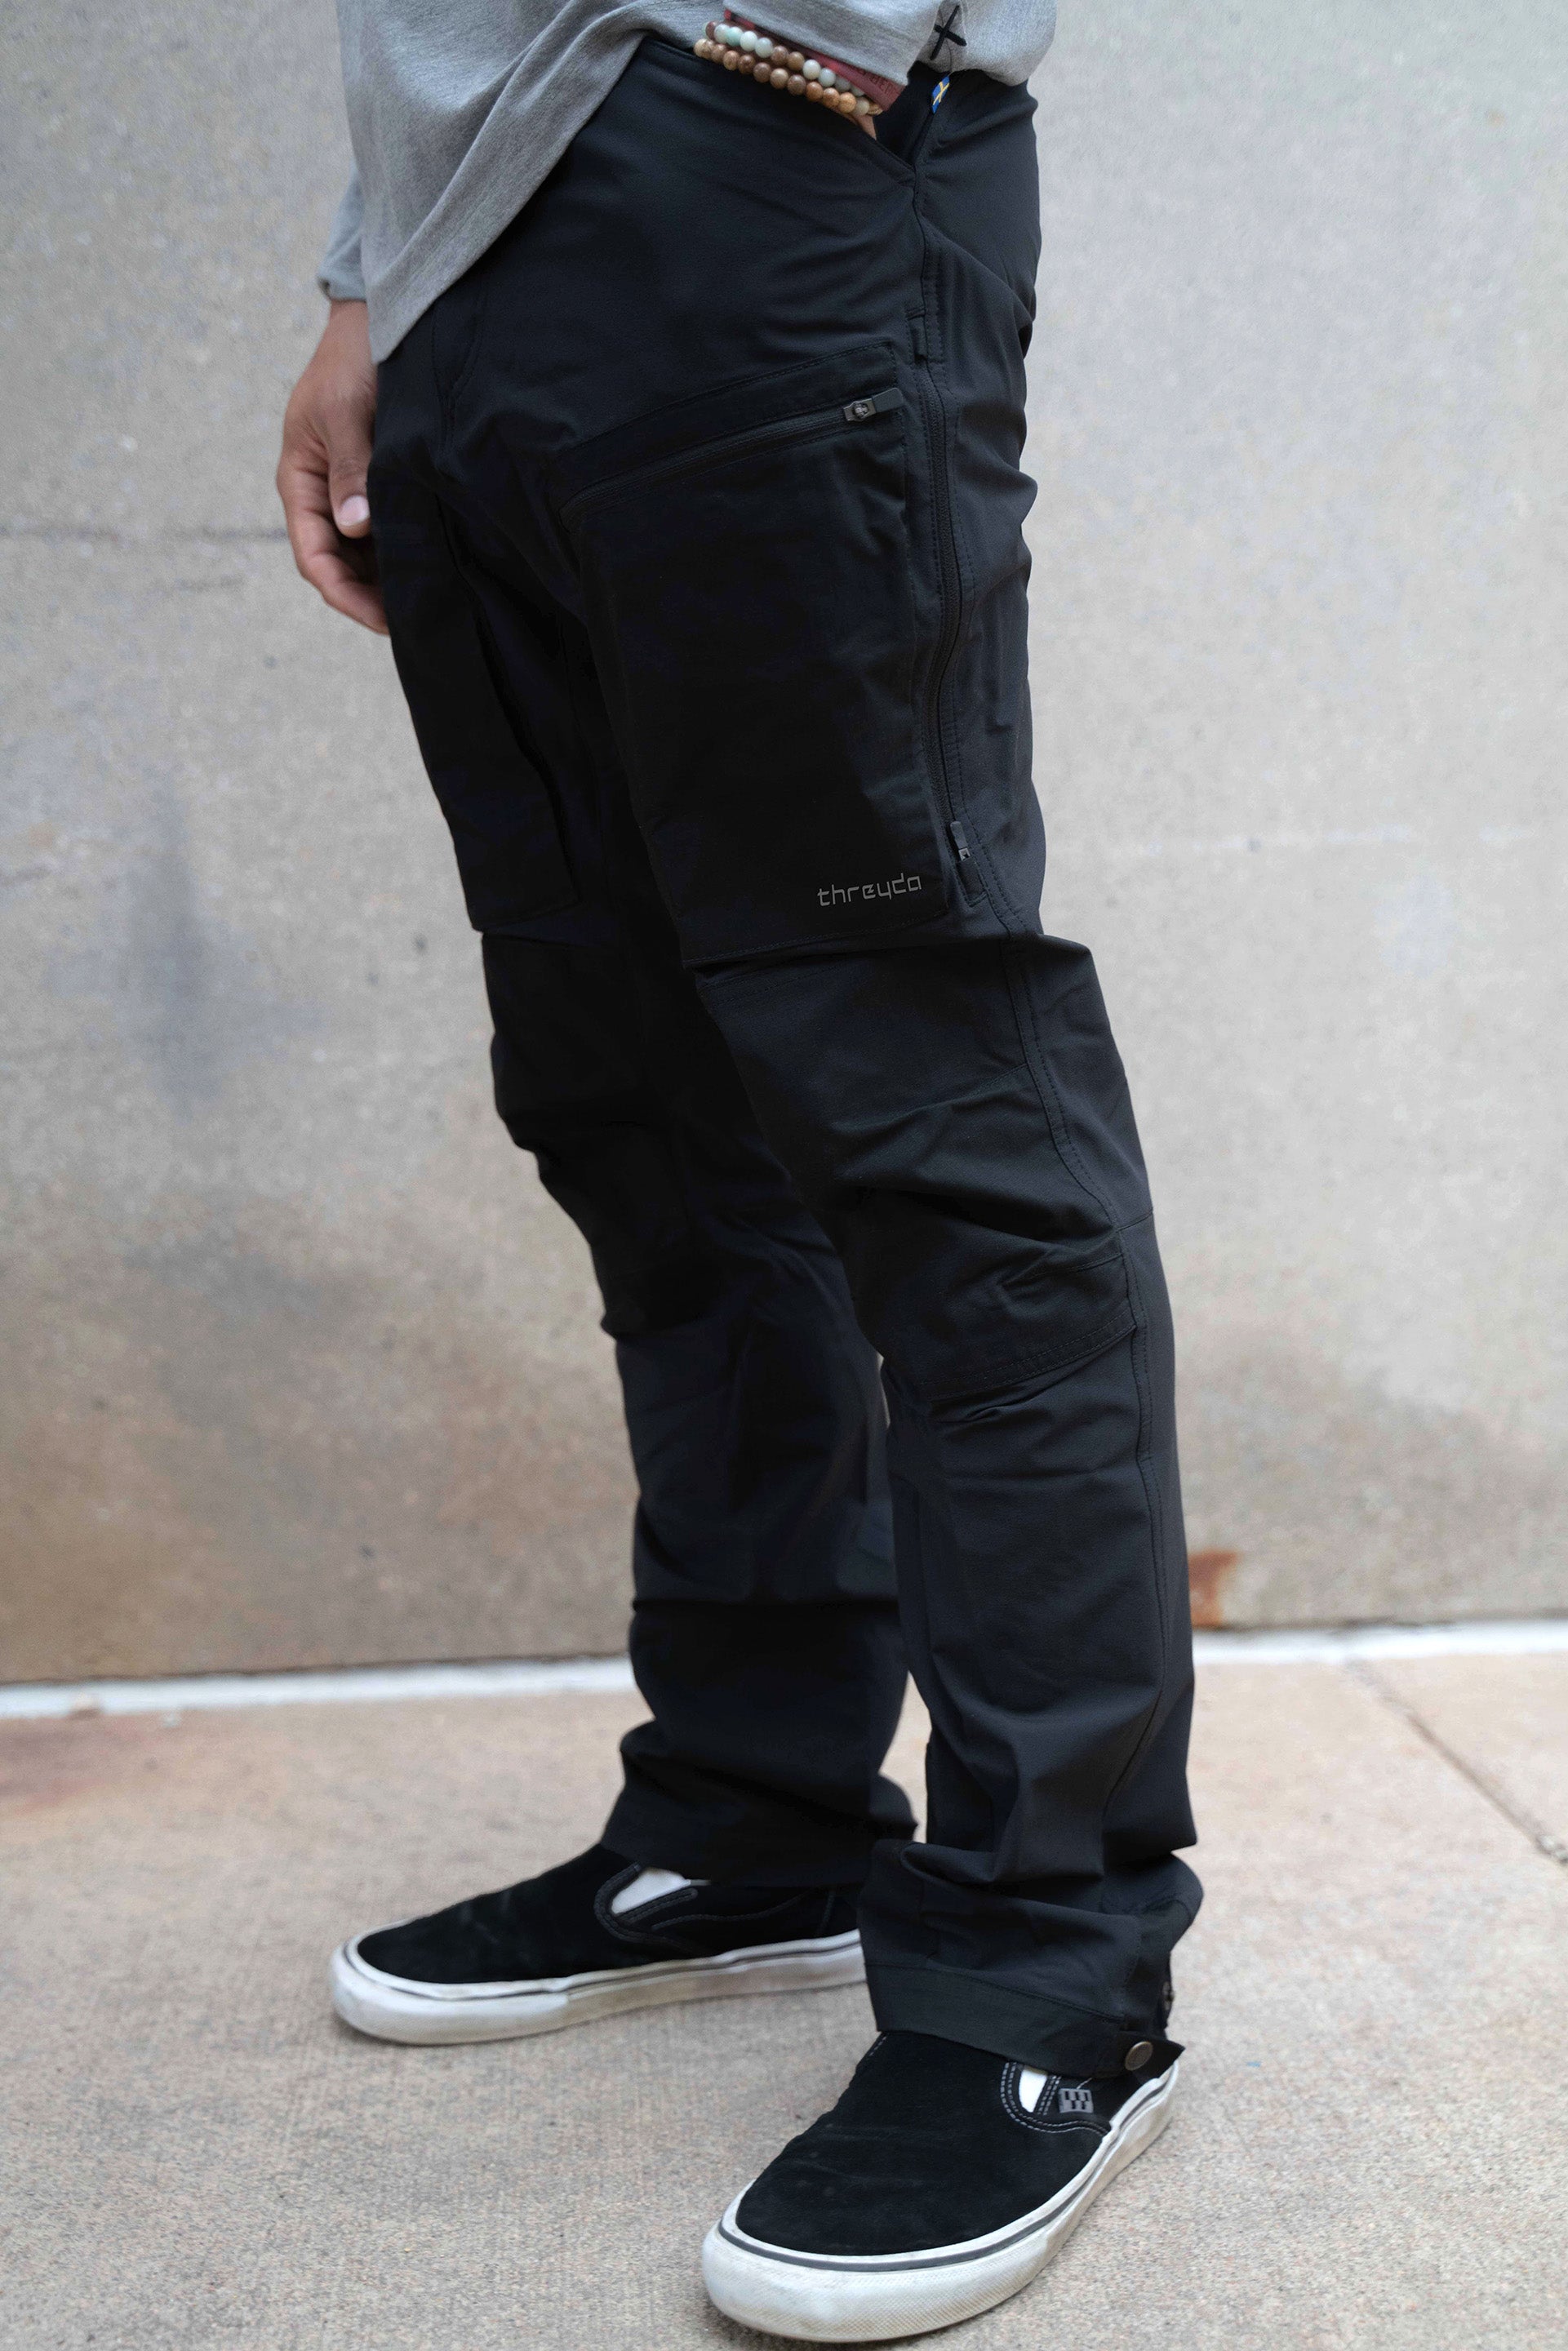 Expedition Pants by Threyda - Presale Ships August